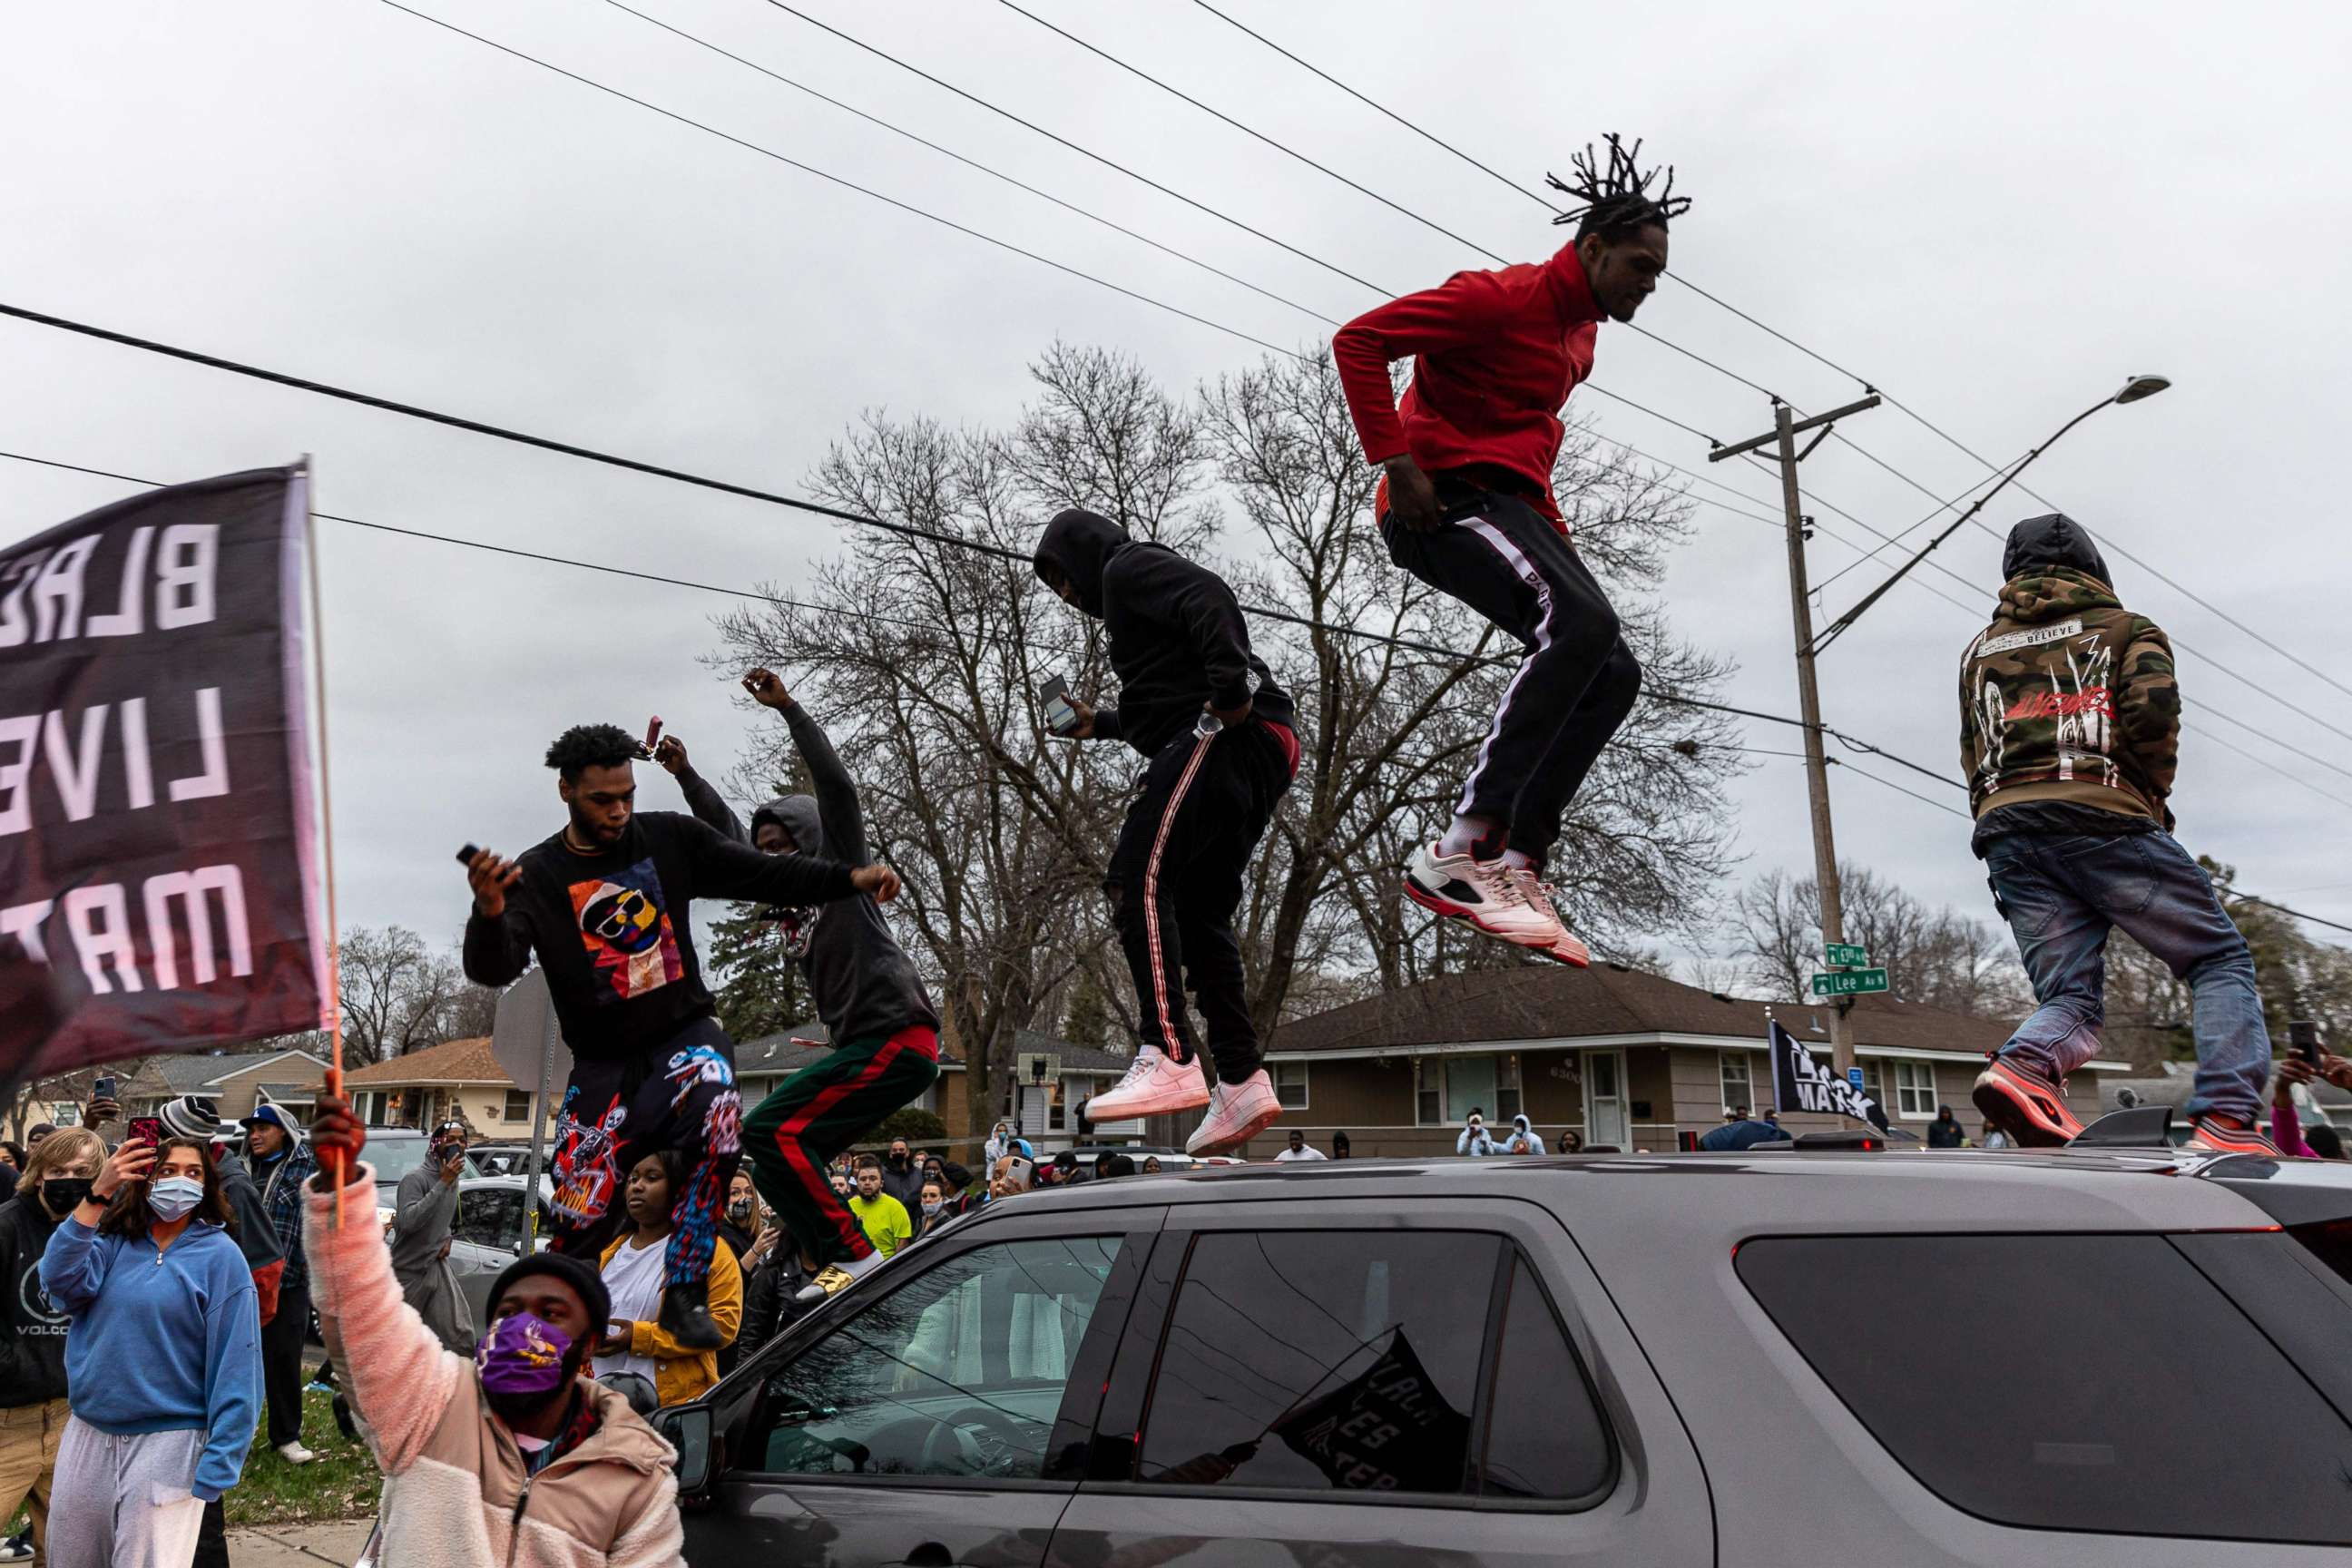 PHOTO: Protesters stand on top of a car as they clash with police after an officer shot and killed a driver during a traffic stop in Brooklyn Center, Minnesota, on April 11, 2021.